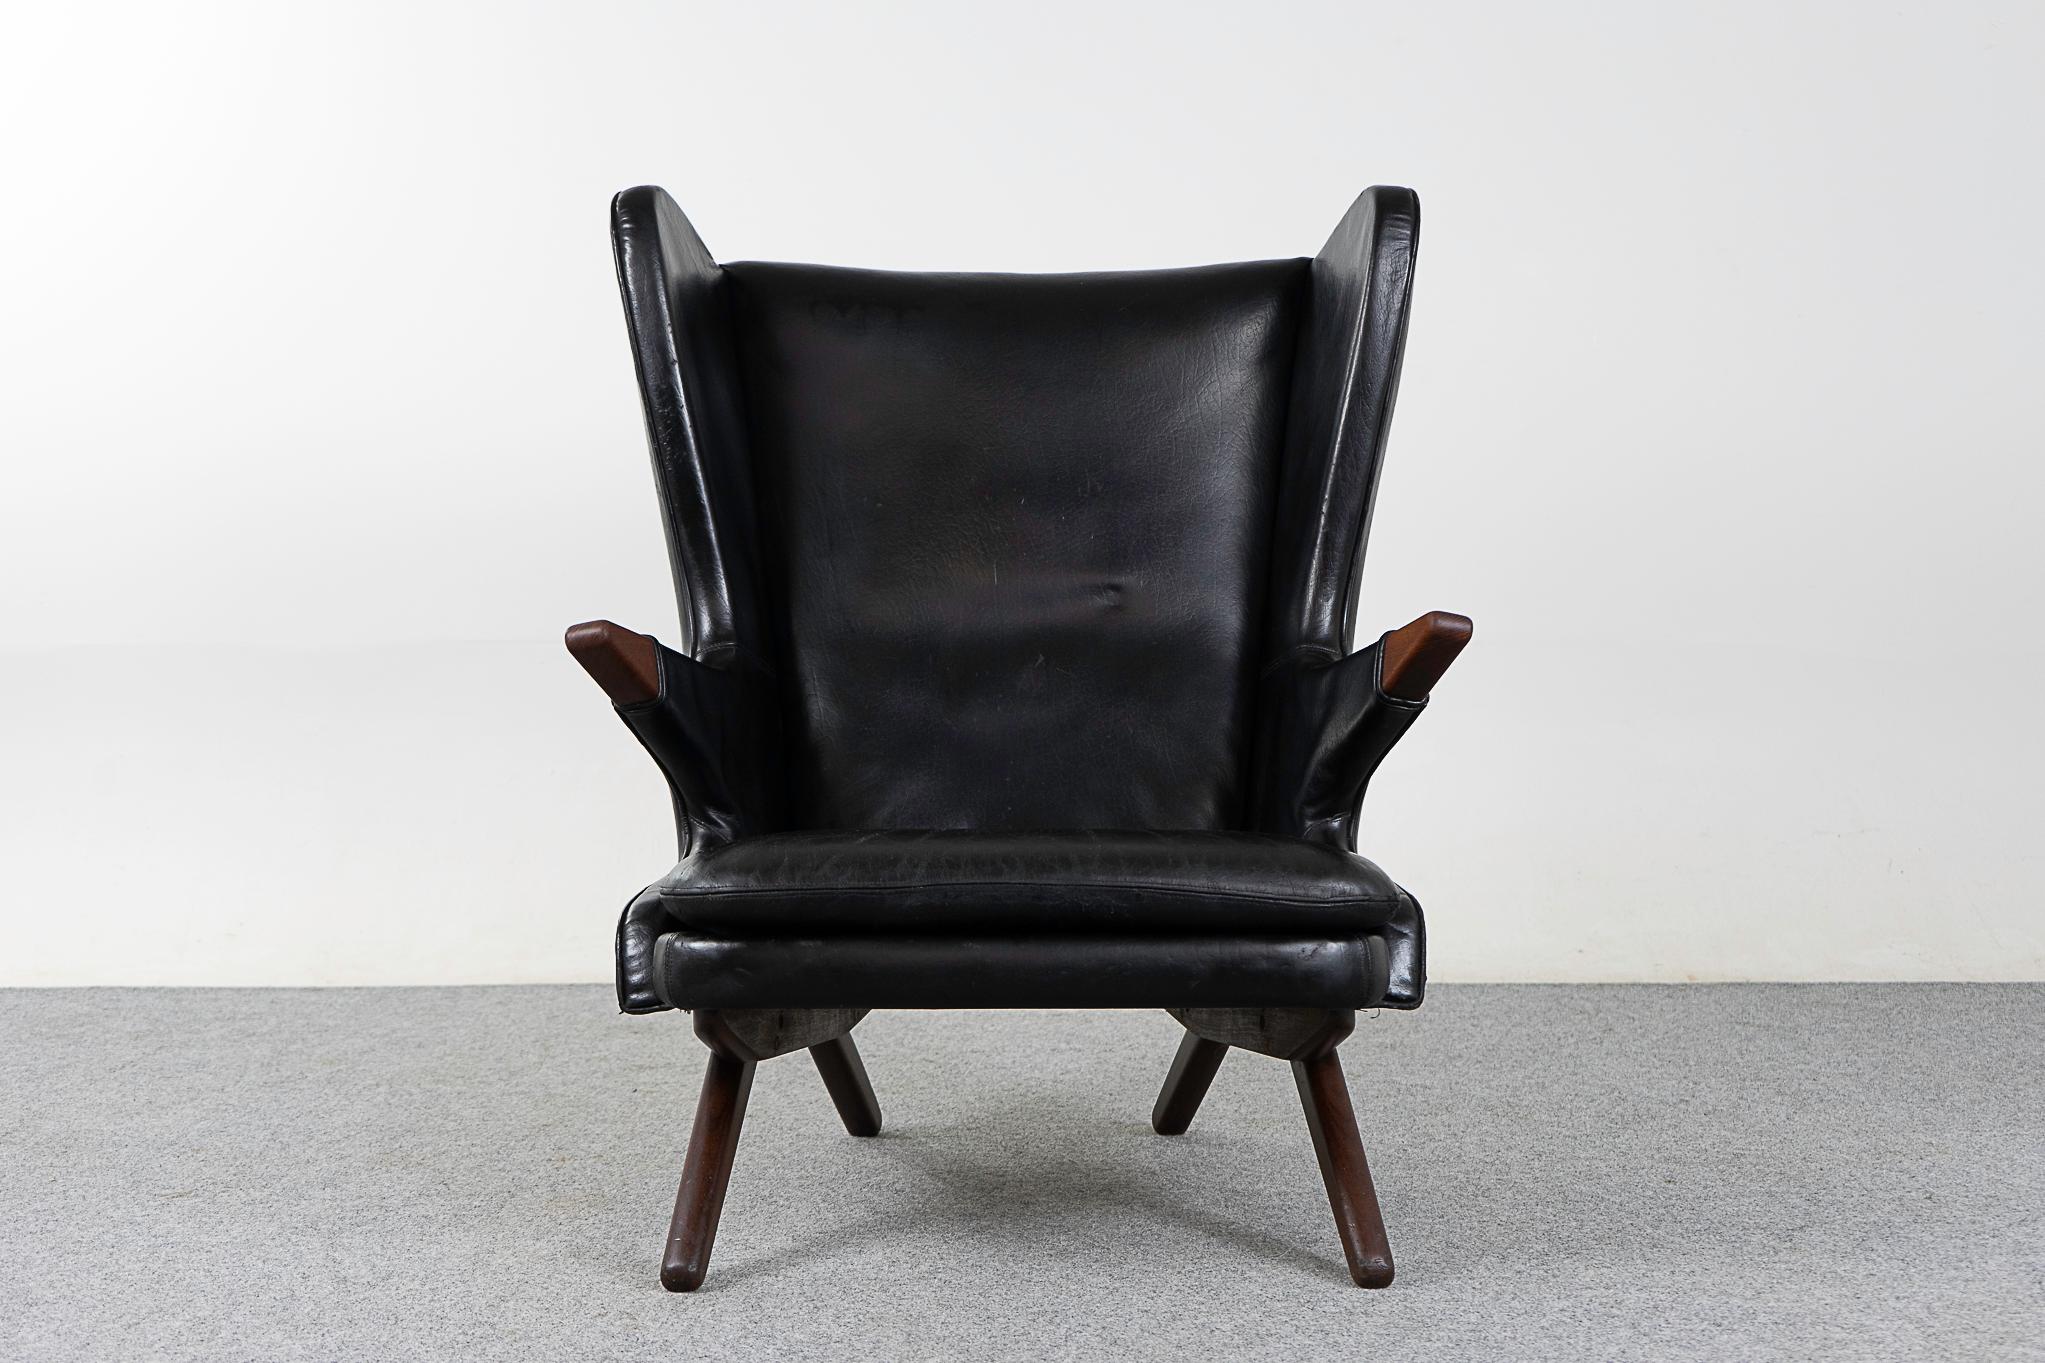 Teak & black vinyl Model 91 chair lounge chair by Svend Skipper, circa 1960's. Iconic eye catching design, as comfortable as it is stylish! Winged high back provides excellent support for your neck. Original upholstery with a fair amount of